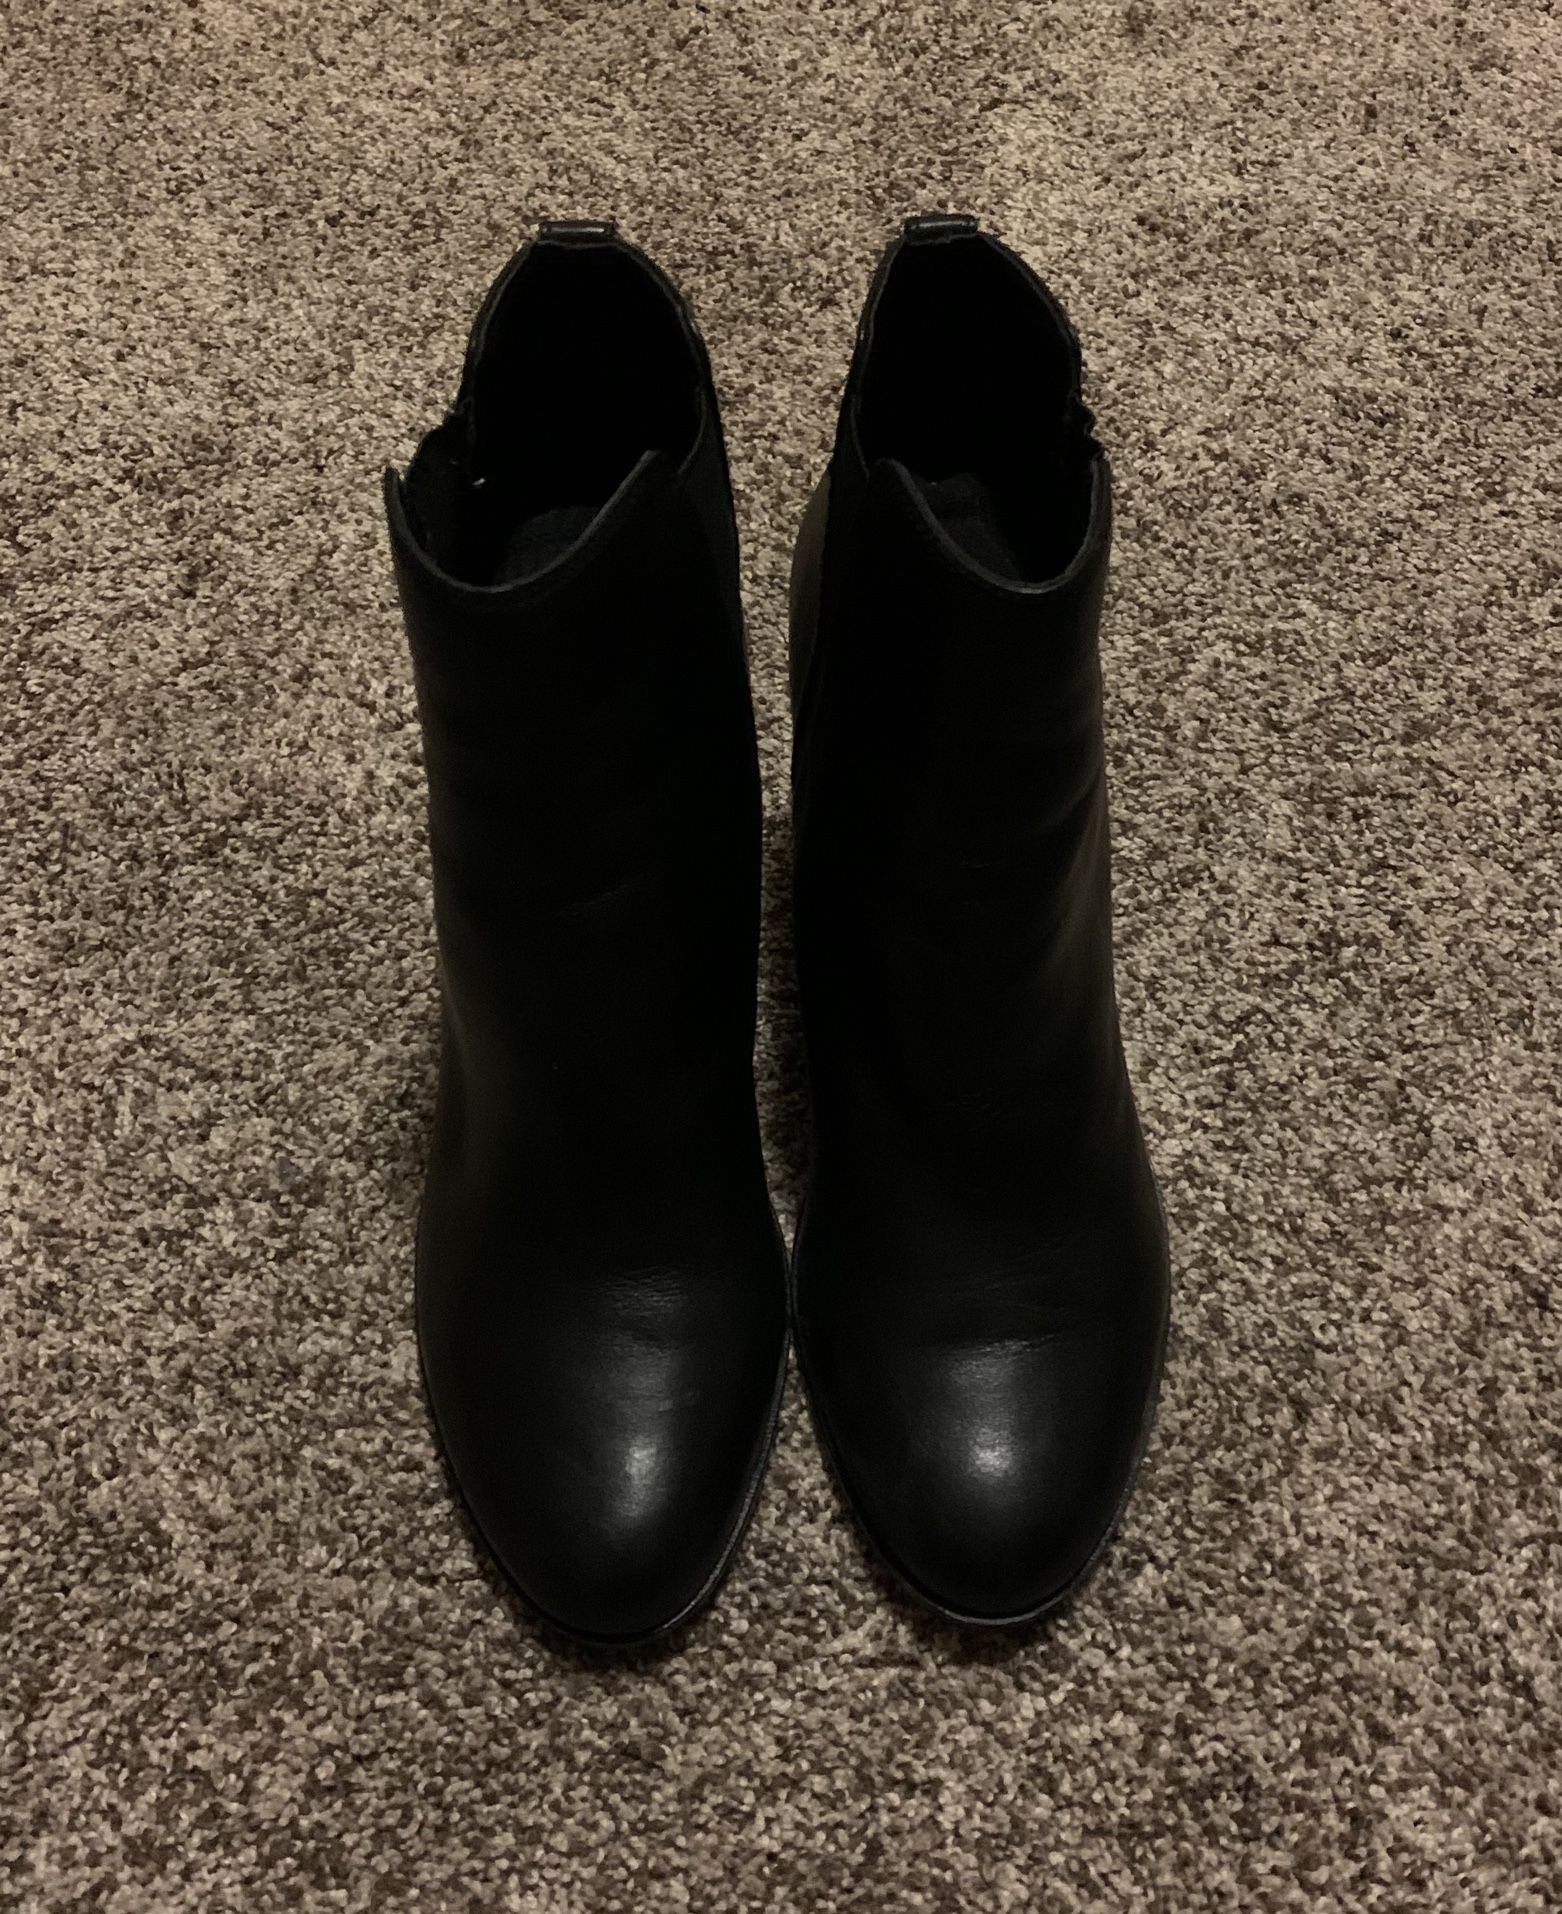 Aldo Ankle High Boots